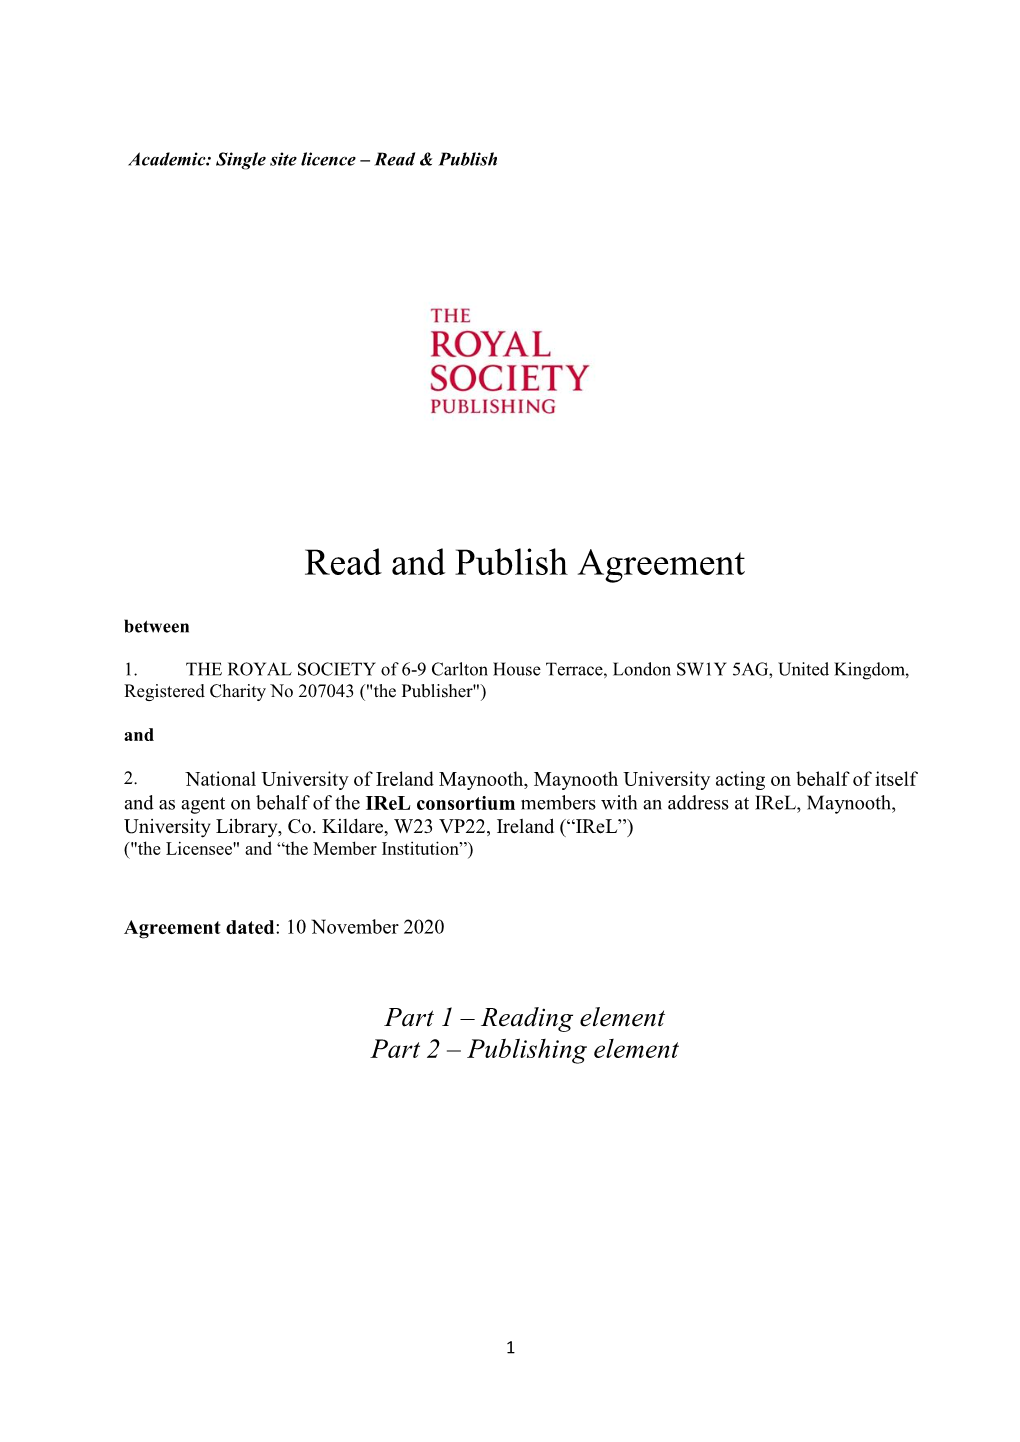 Read and Publish Agreement Between